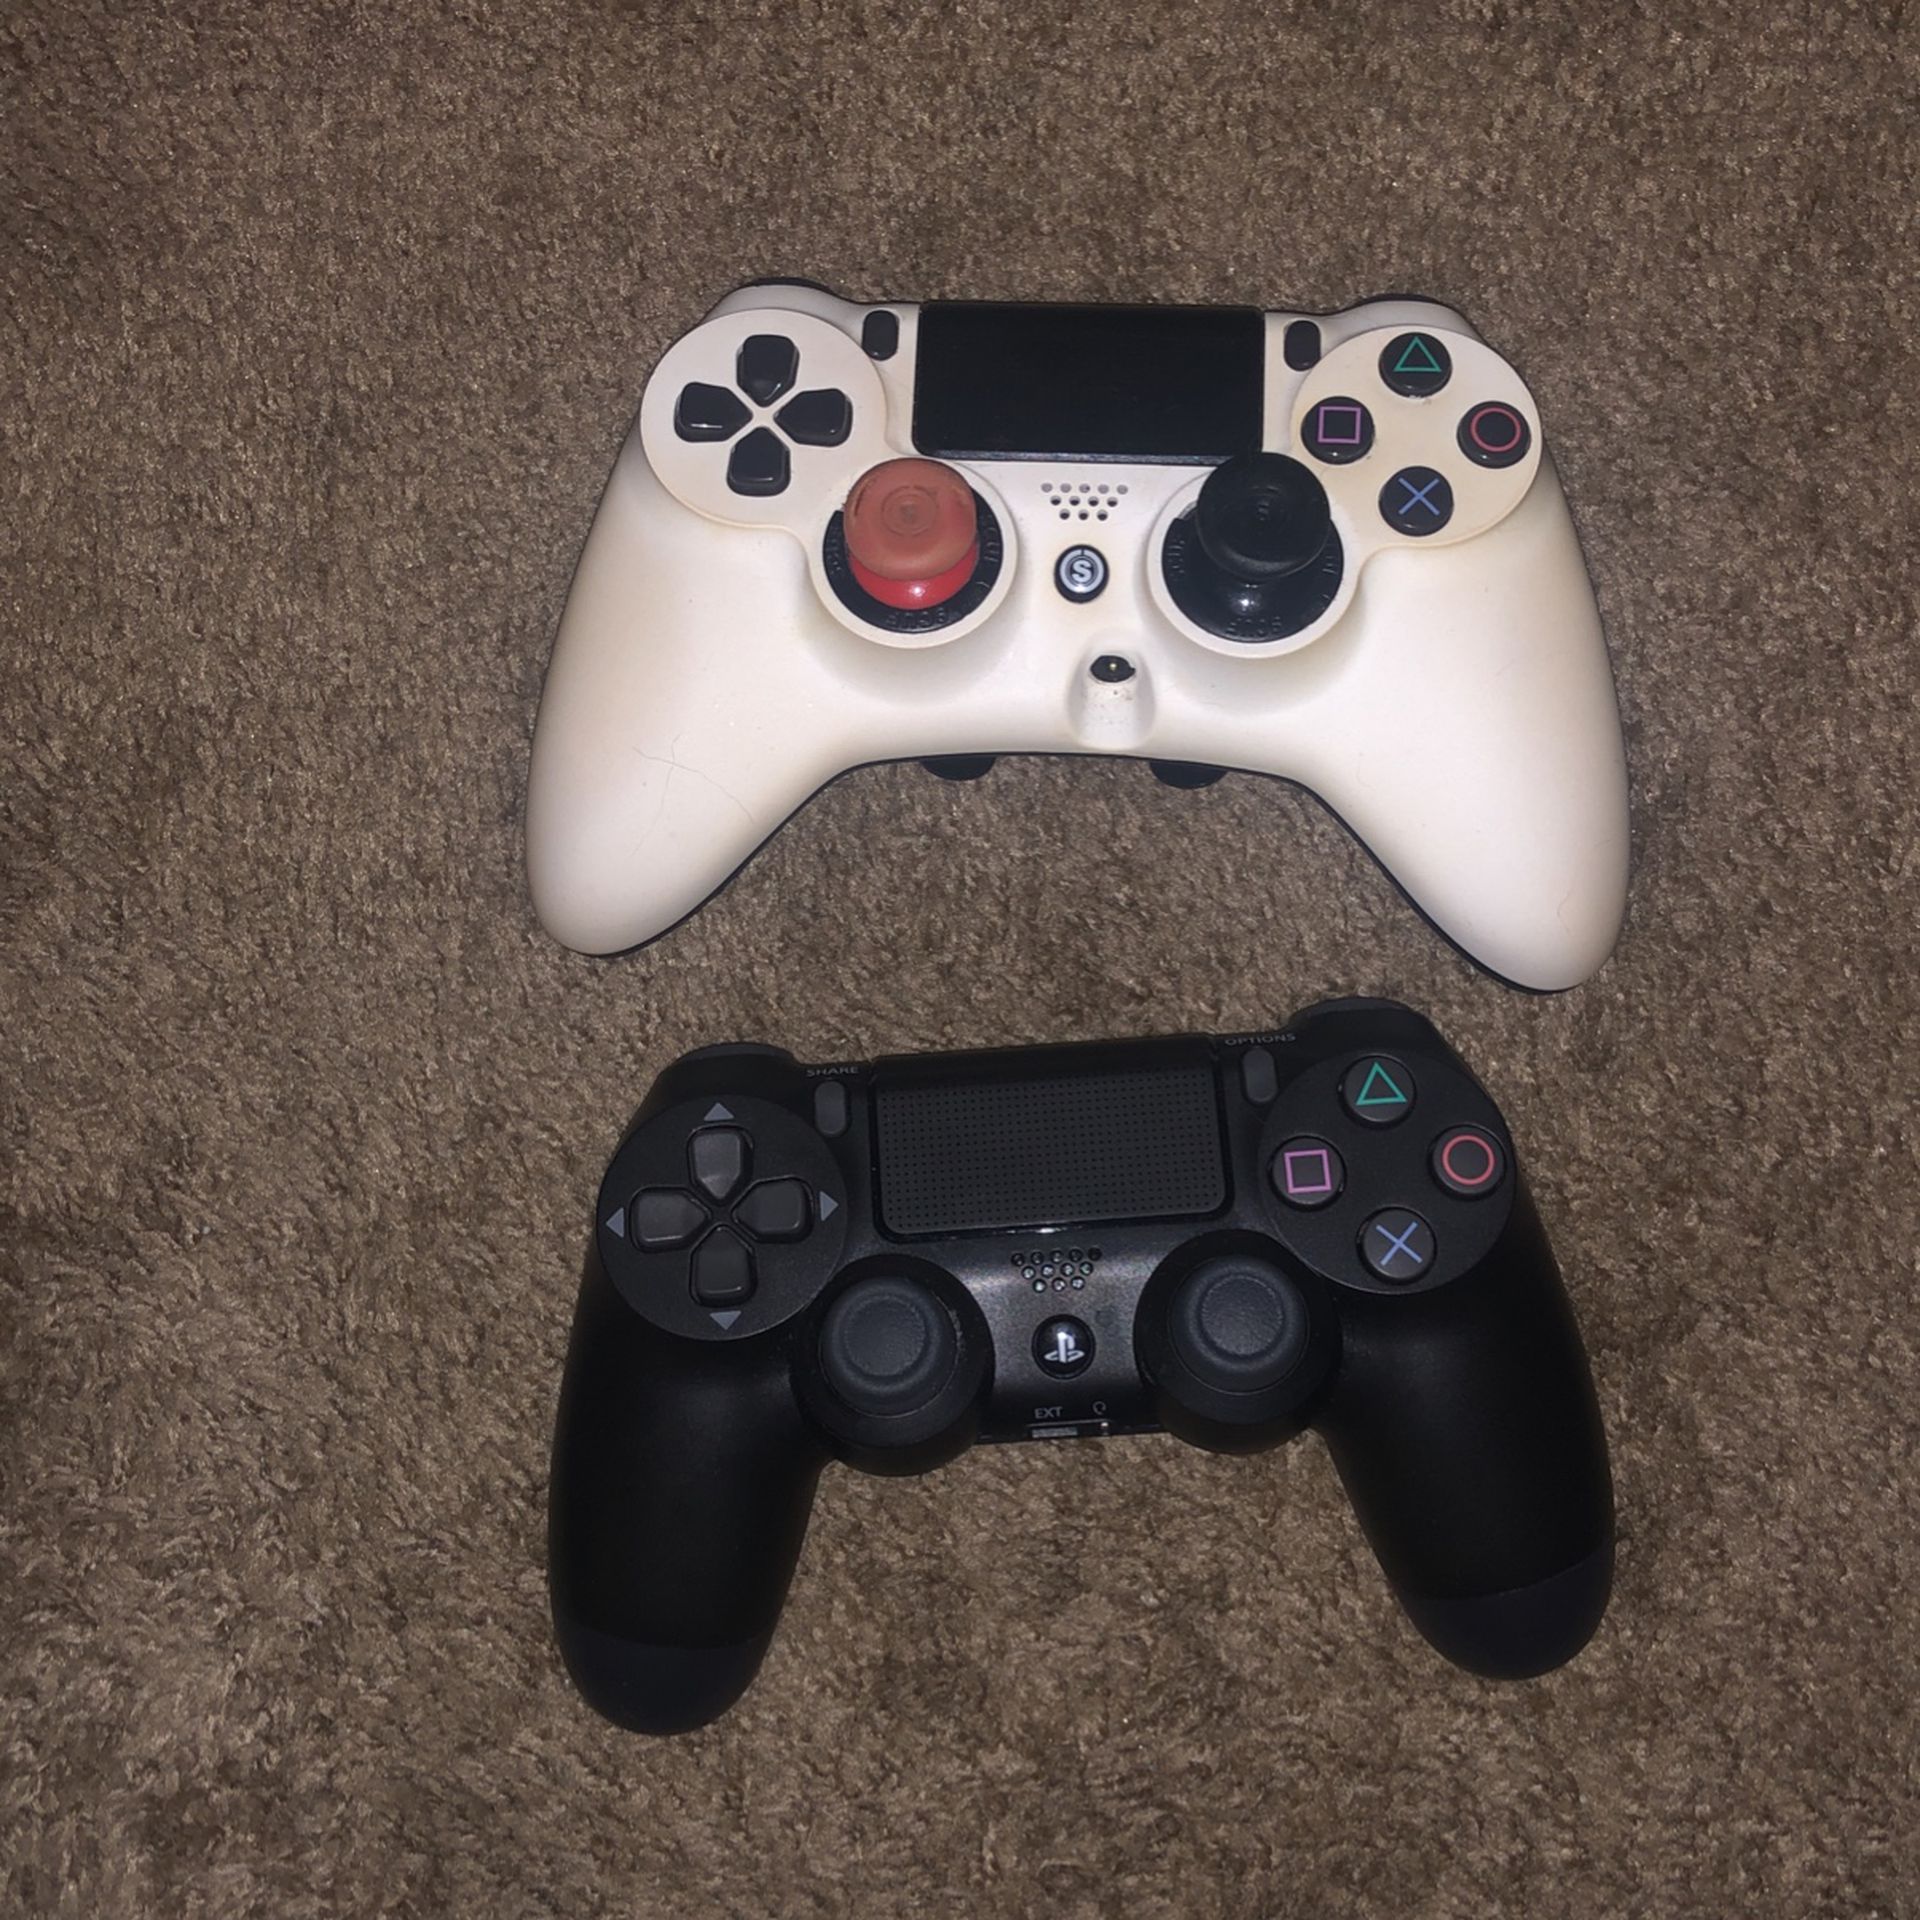 Ps4 Pro With One Regular Ps4 Controller And 1 Scuff Impact 